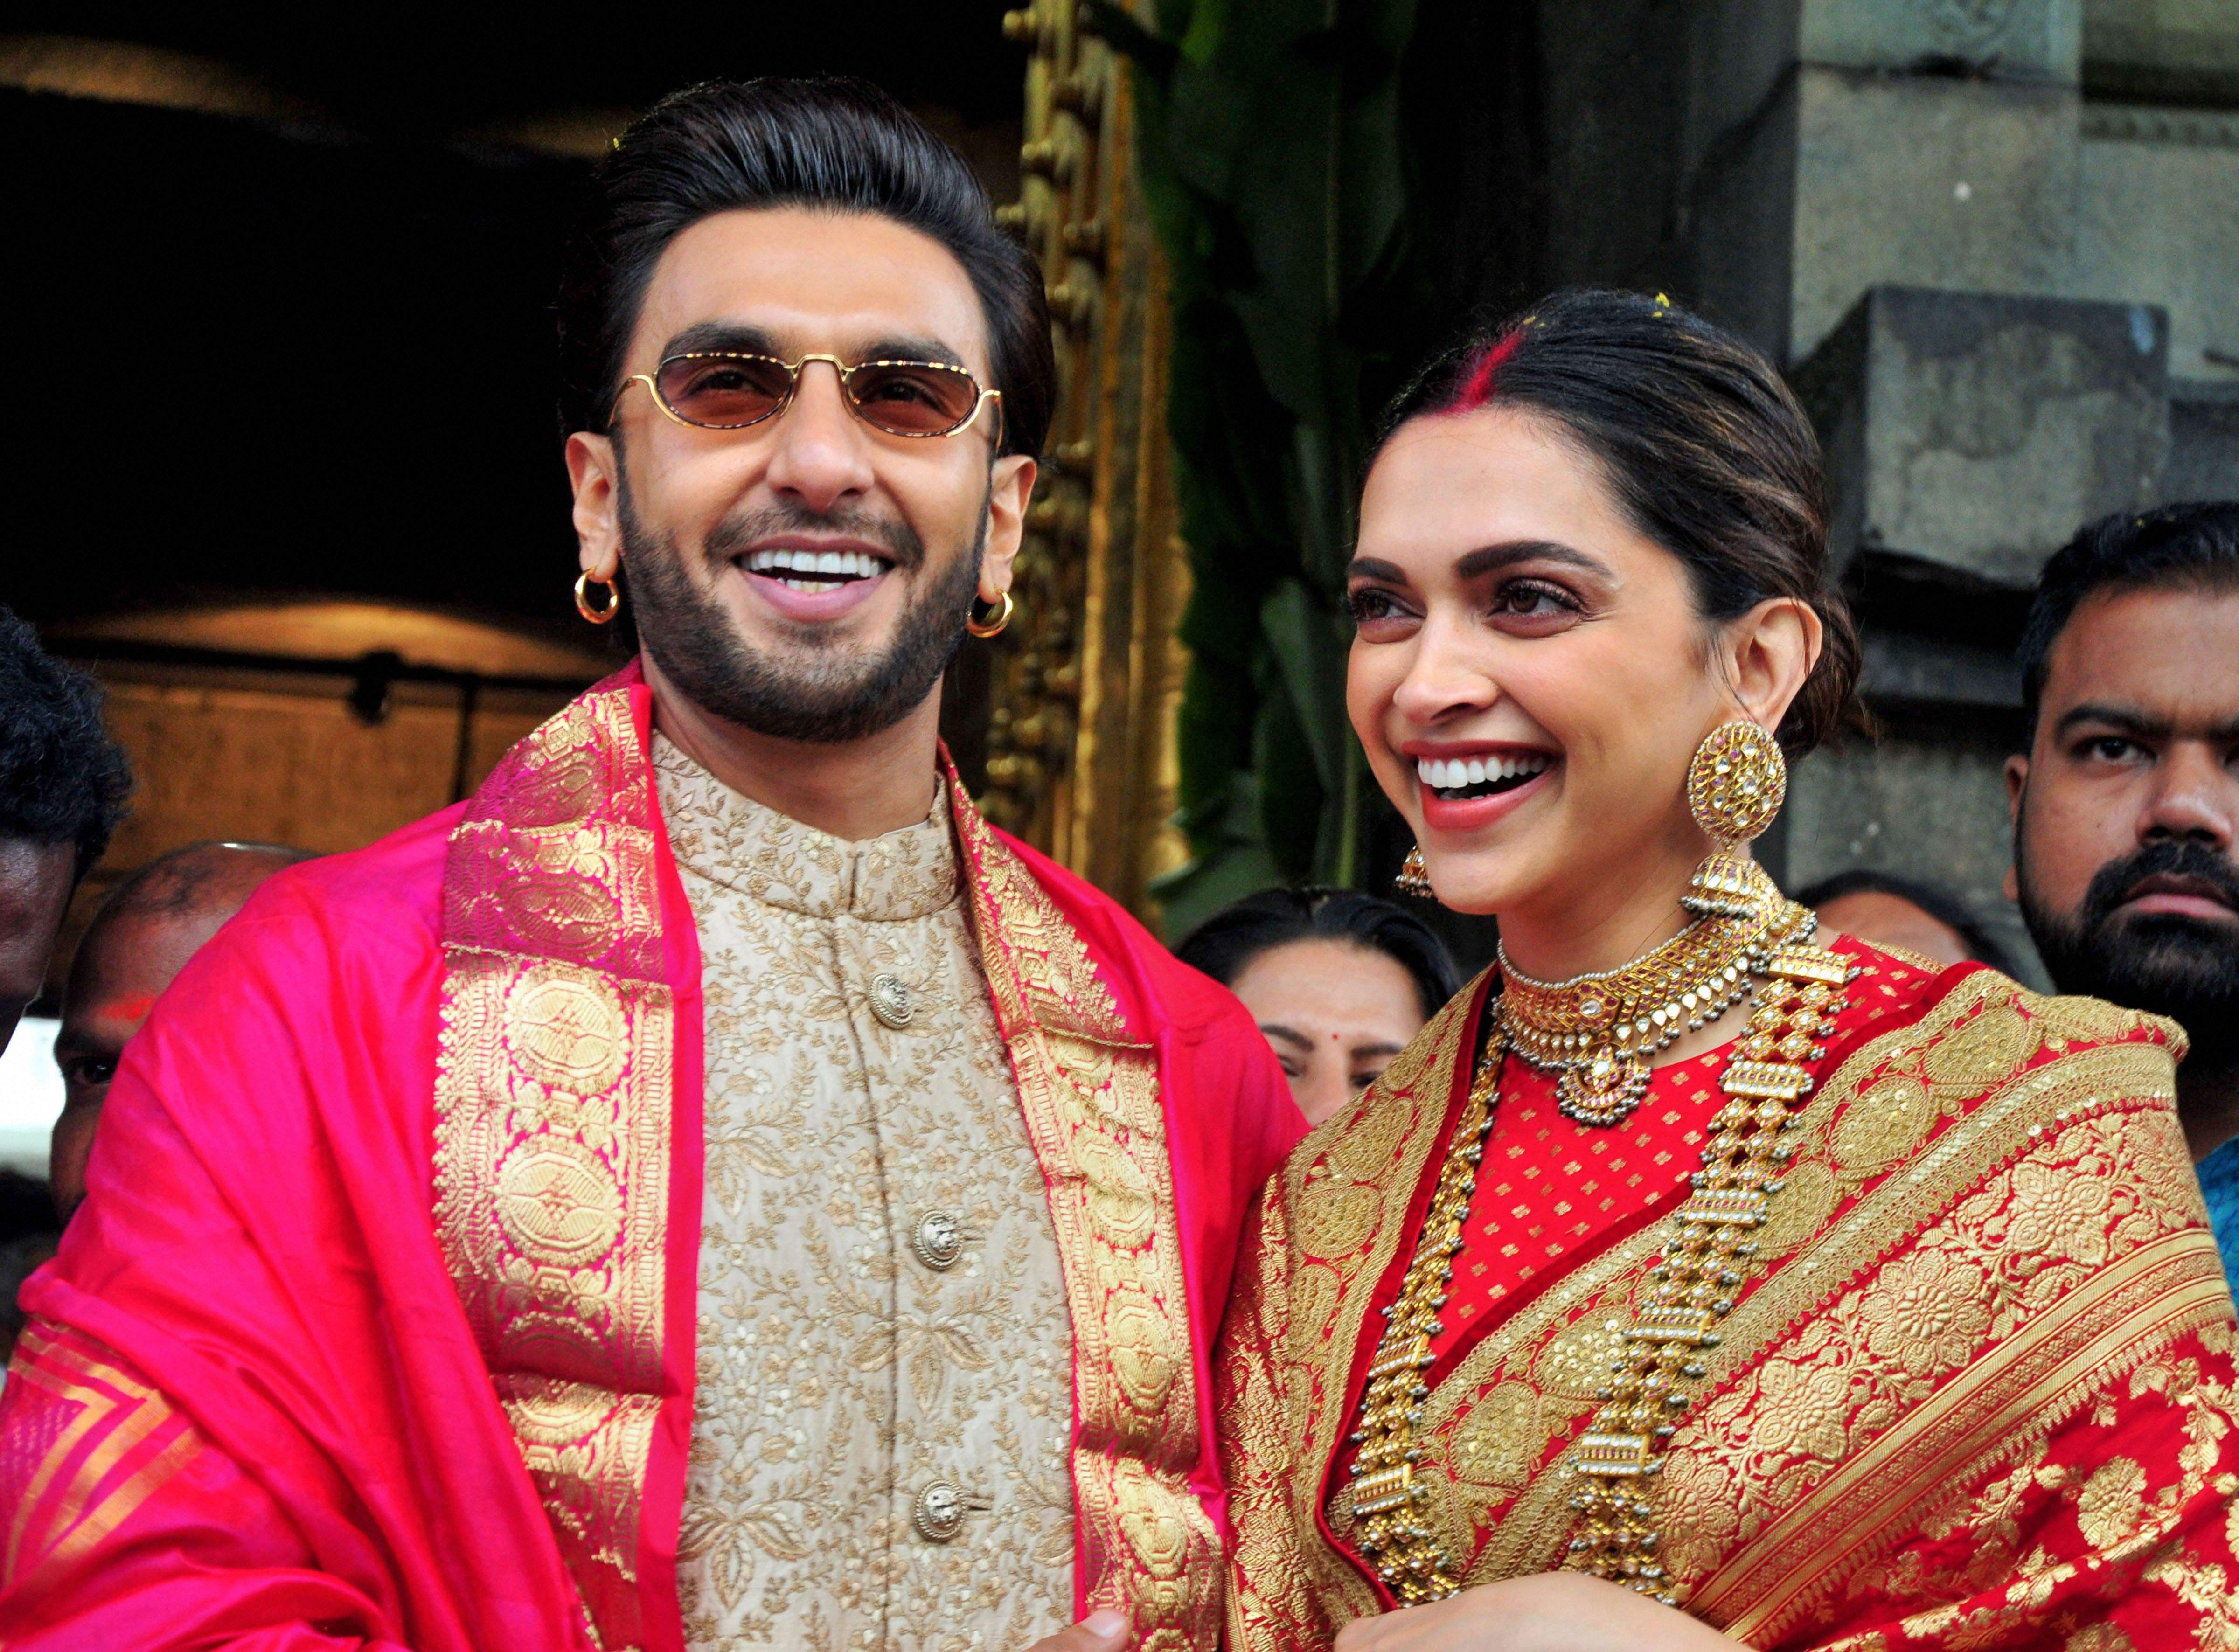 IN PHOTOS. Deepika Padukone and Ranveer Sngh's epic love story- The New Indian Express